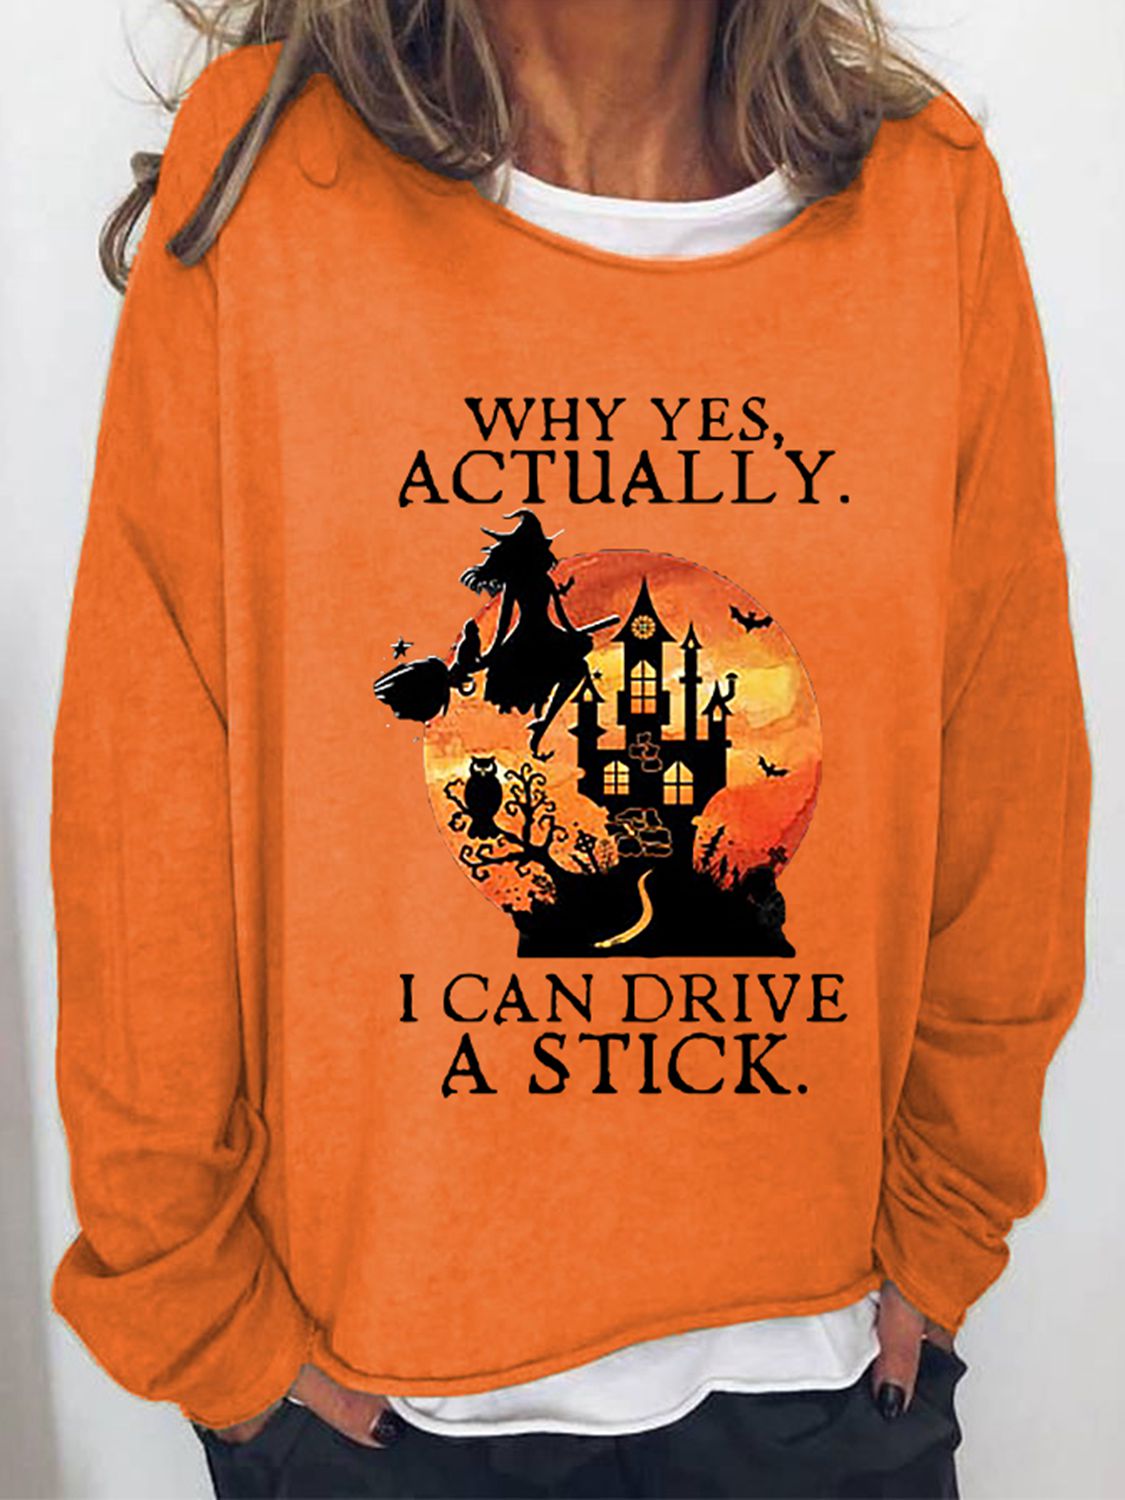 Why Yes Actually I Can Drive A Stick Sweatshirt - Orange / S - T-Shirts - Shirts & Tops - 1 - 2024